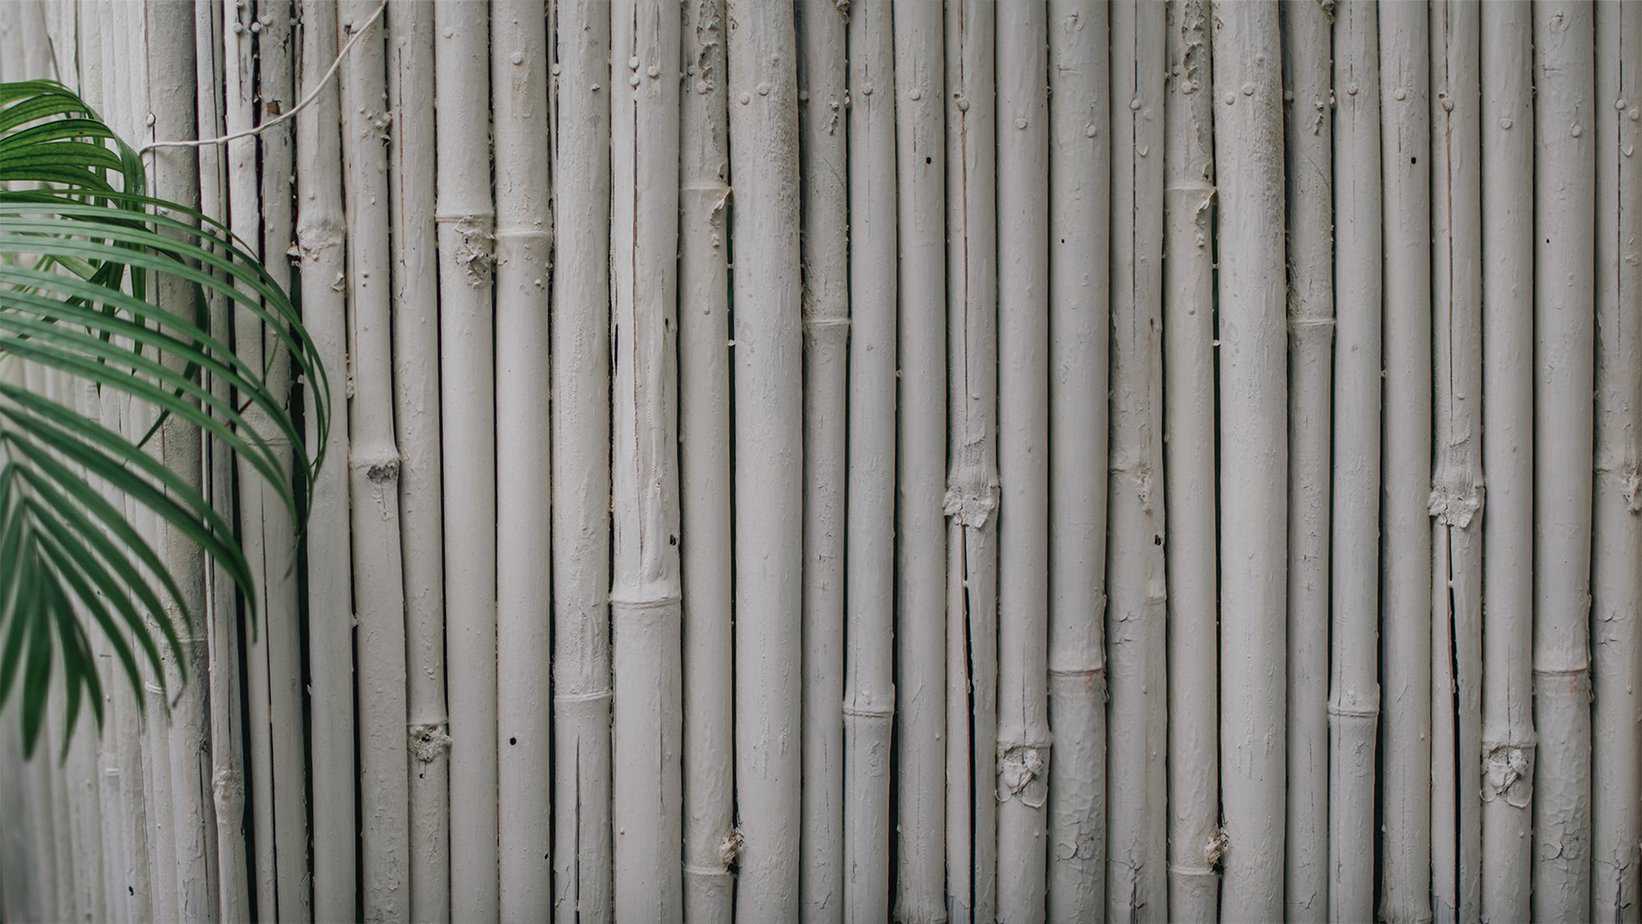 Bamboo screens used as fencing in a garden.